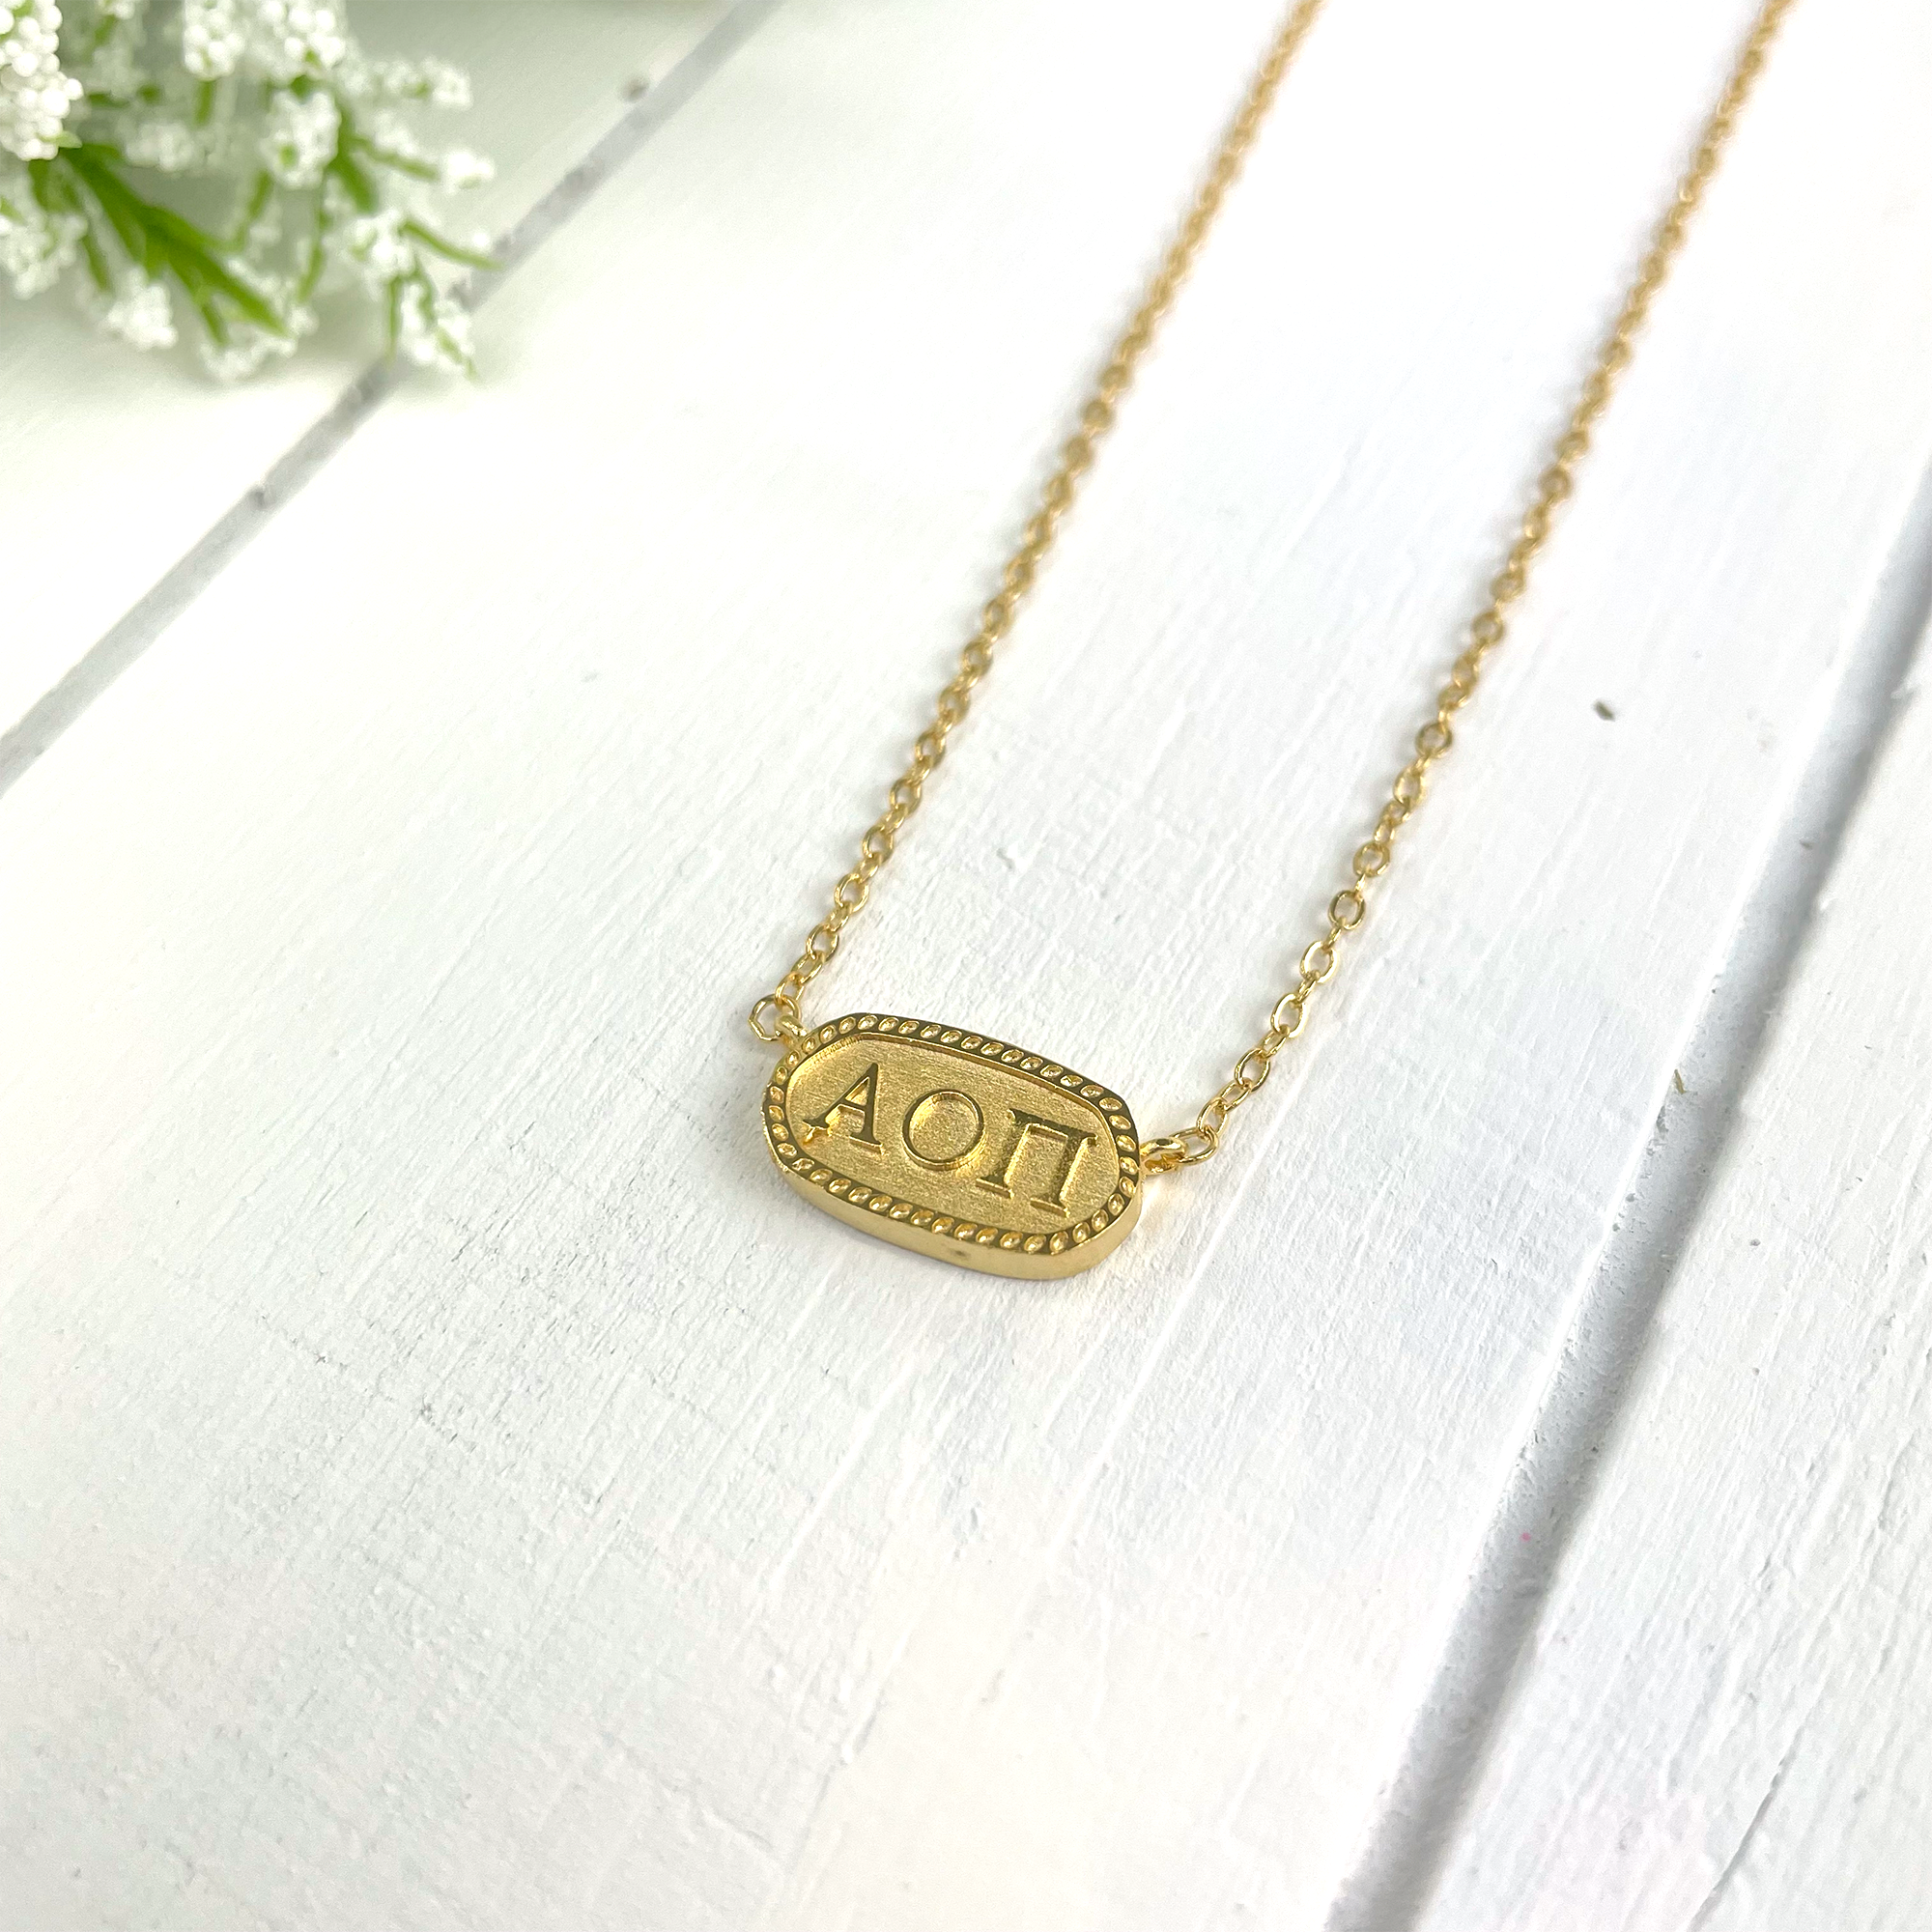 Alpha Omicron Pi Gold Plated Athena Necklace - Go Greek Chic